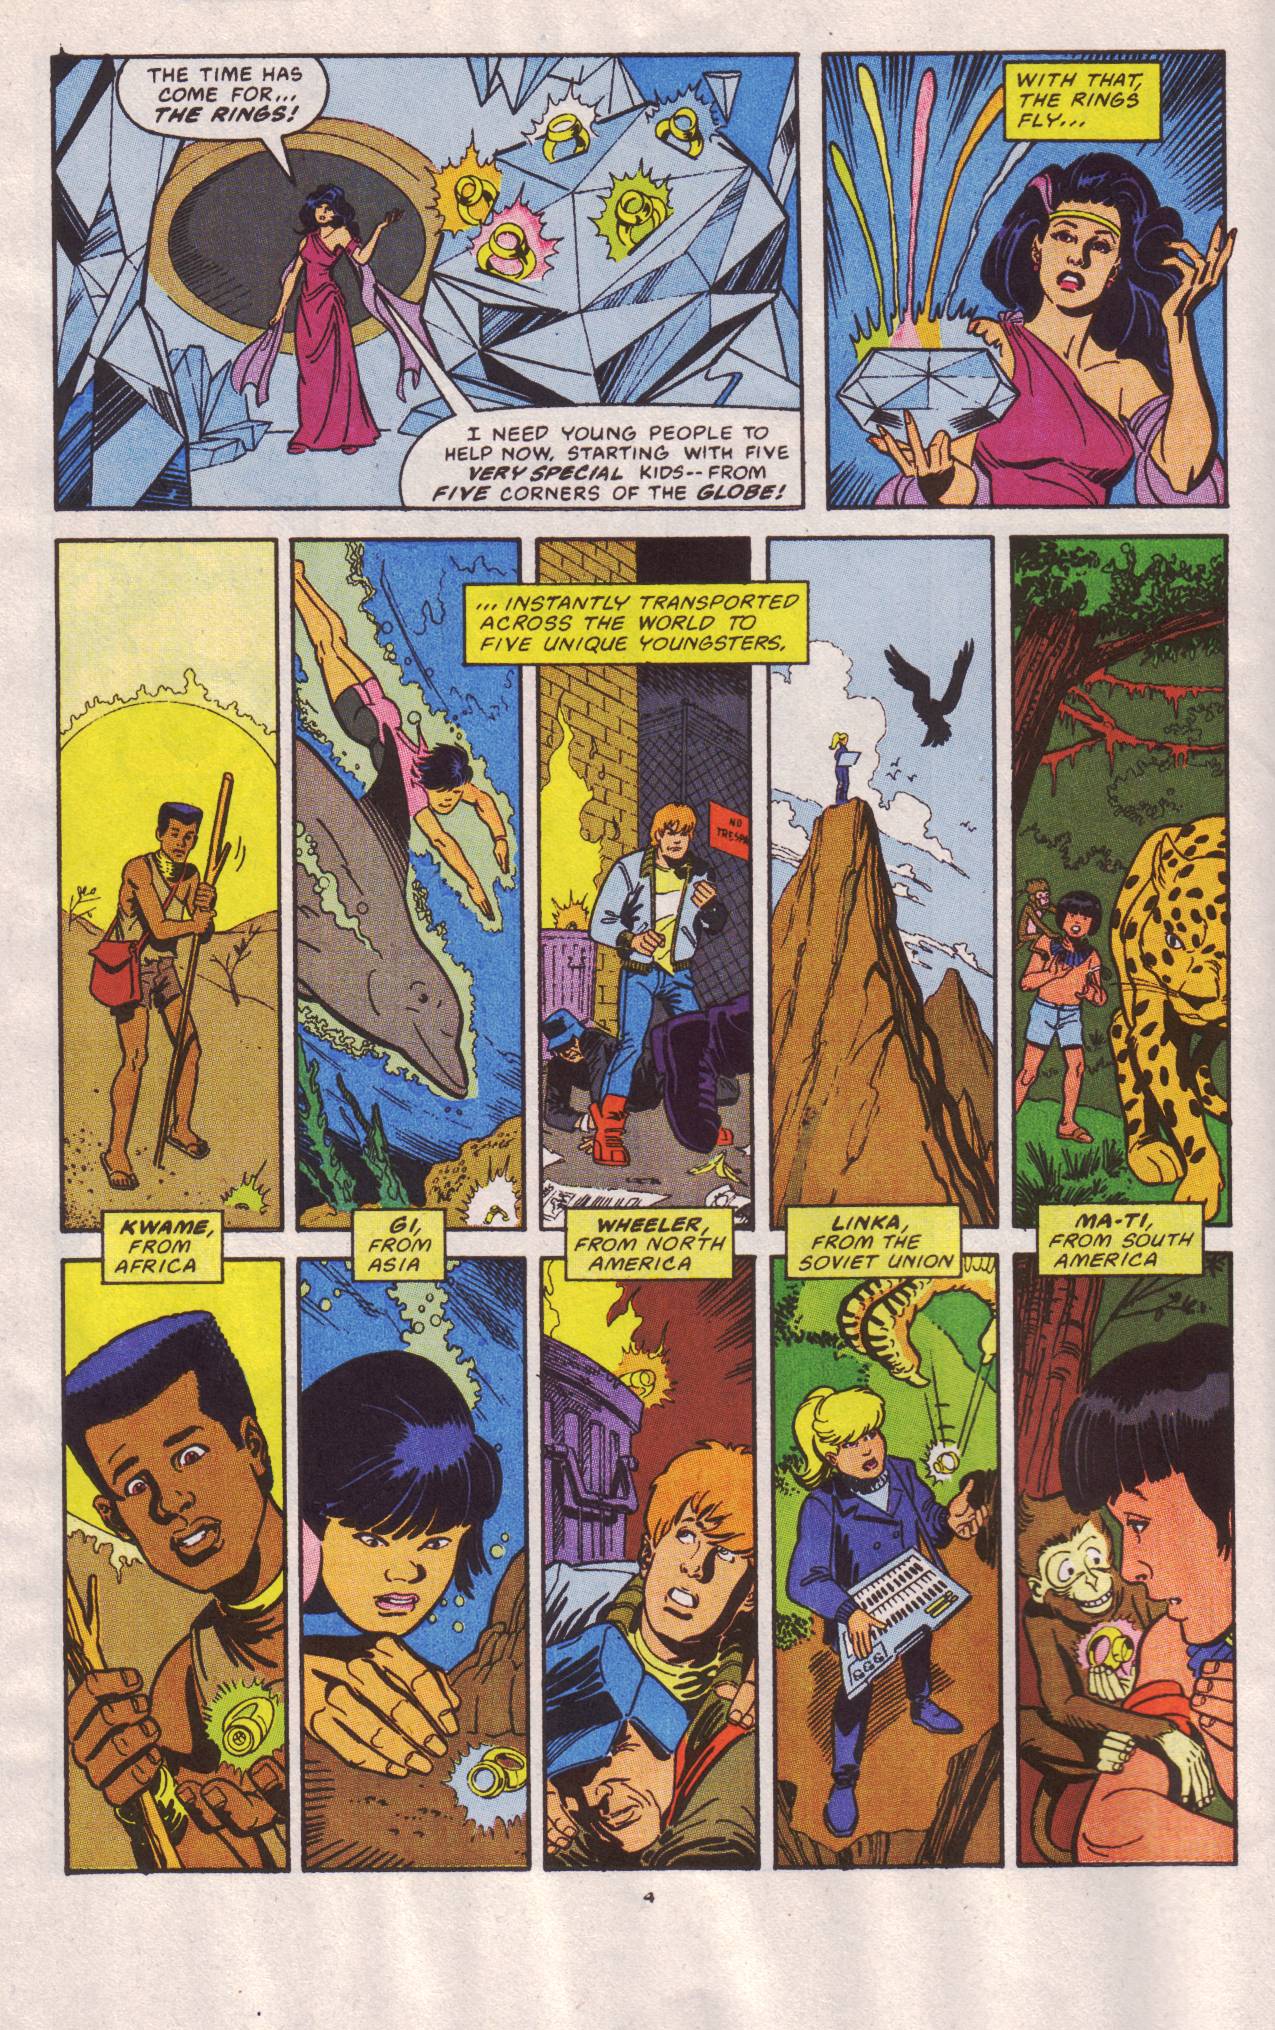 Captain Planet and the Planeteers 1 Page 4